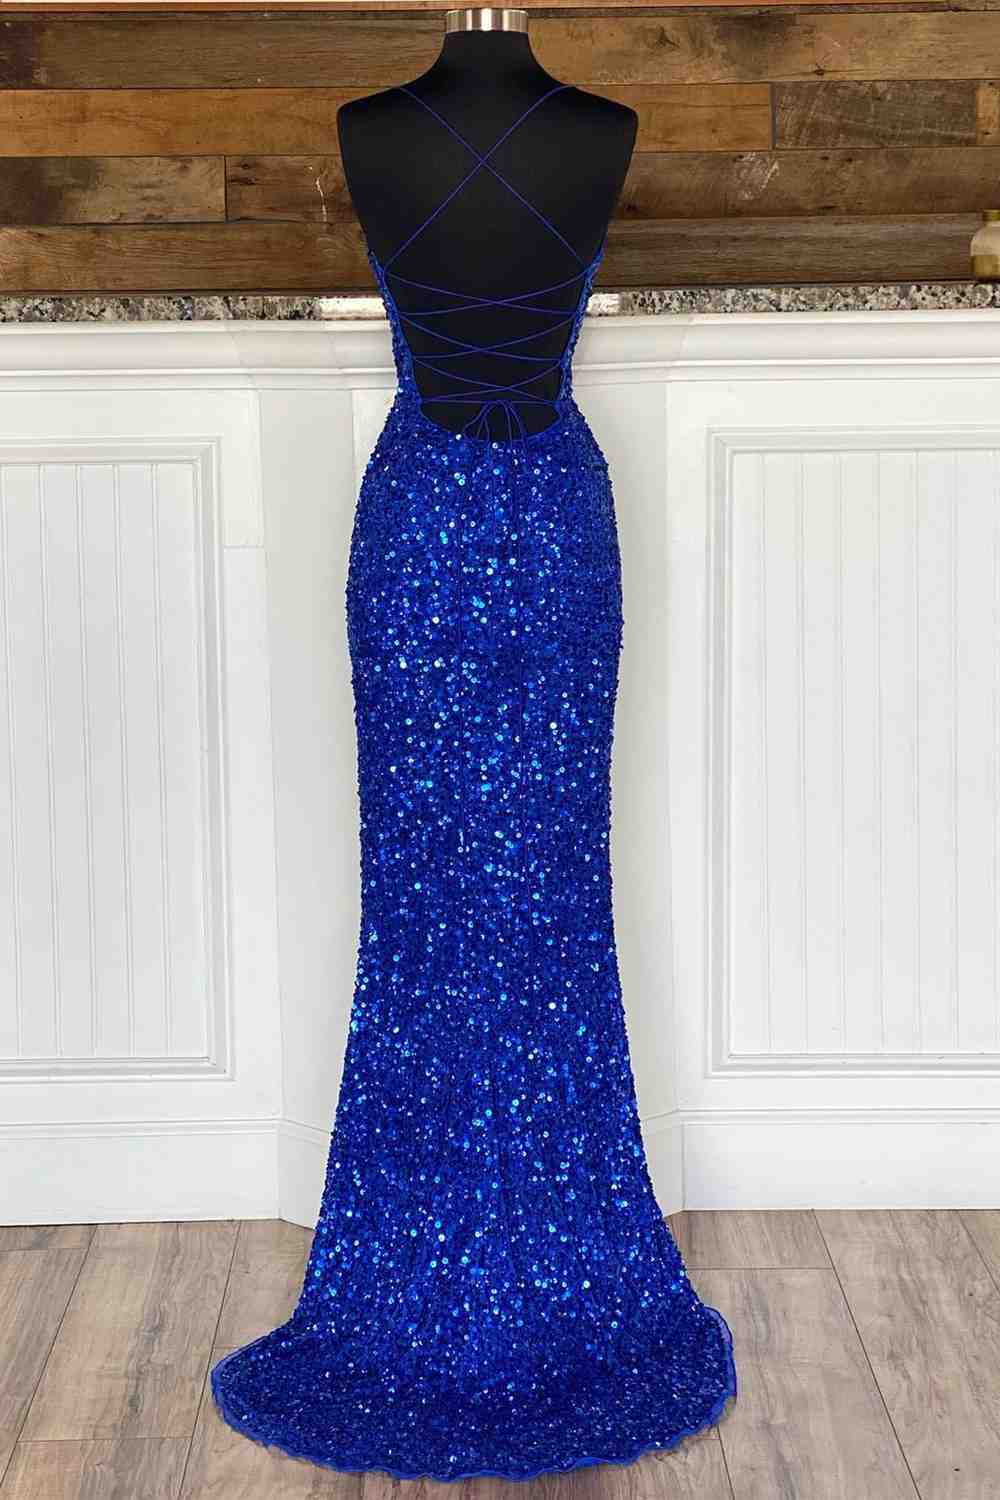 Off The Shoulder Ball Gown Satin Dresses | Ball gowns, Royal blue prom  dresses, Prom dresses blue